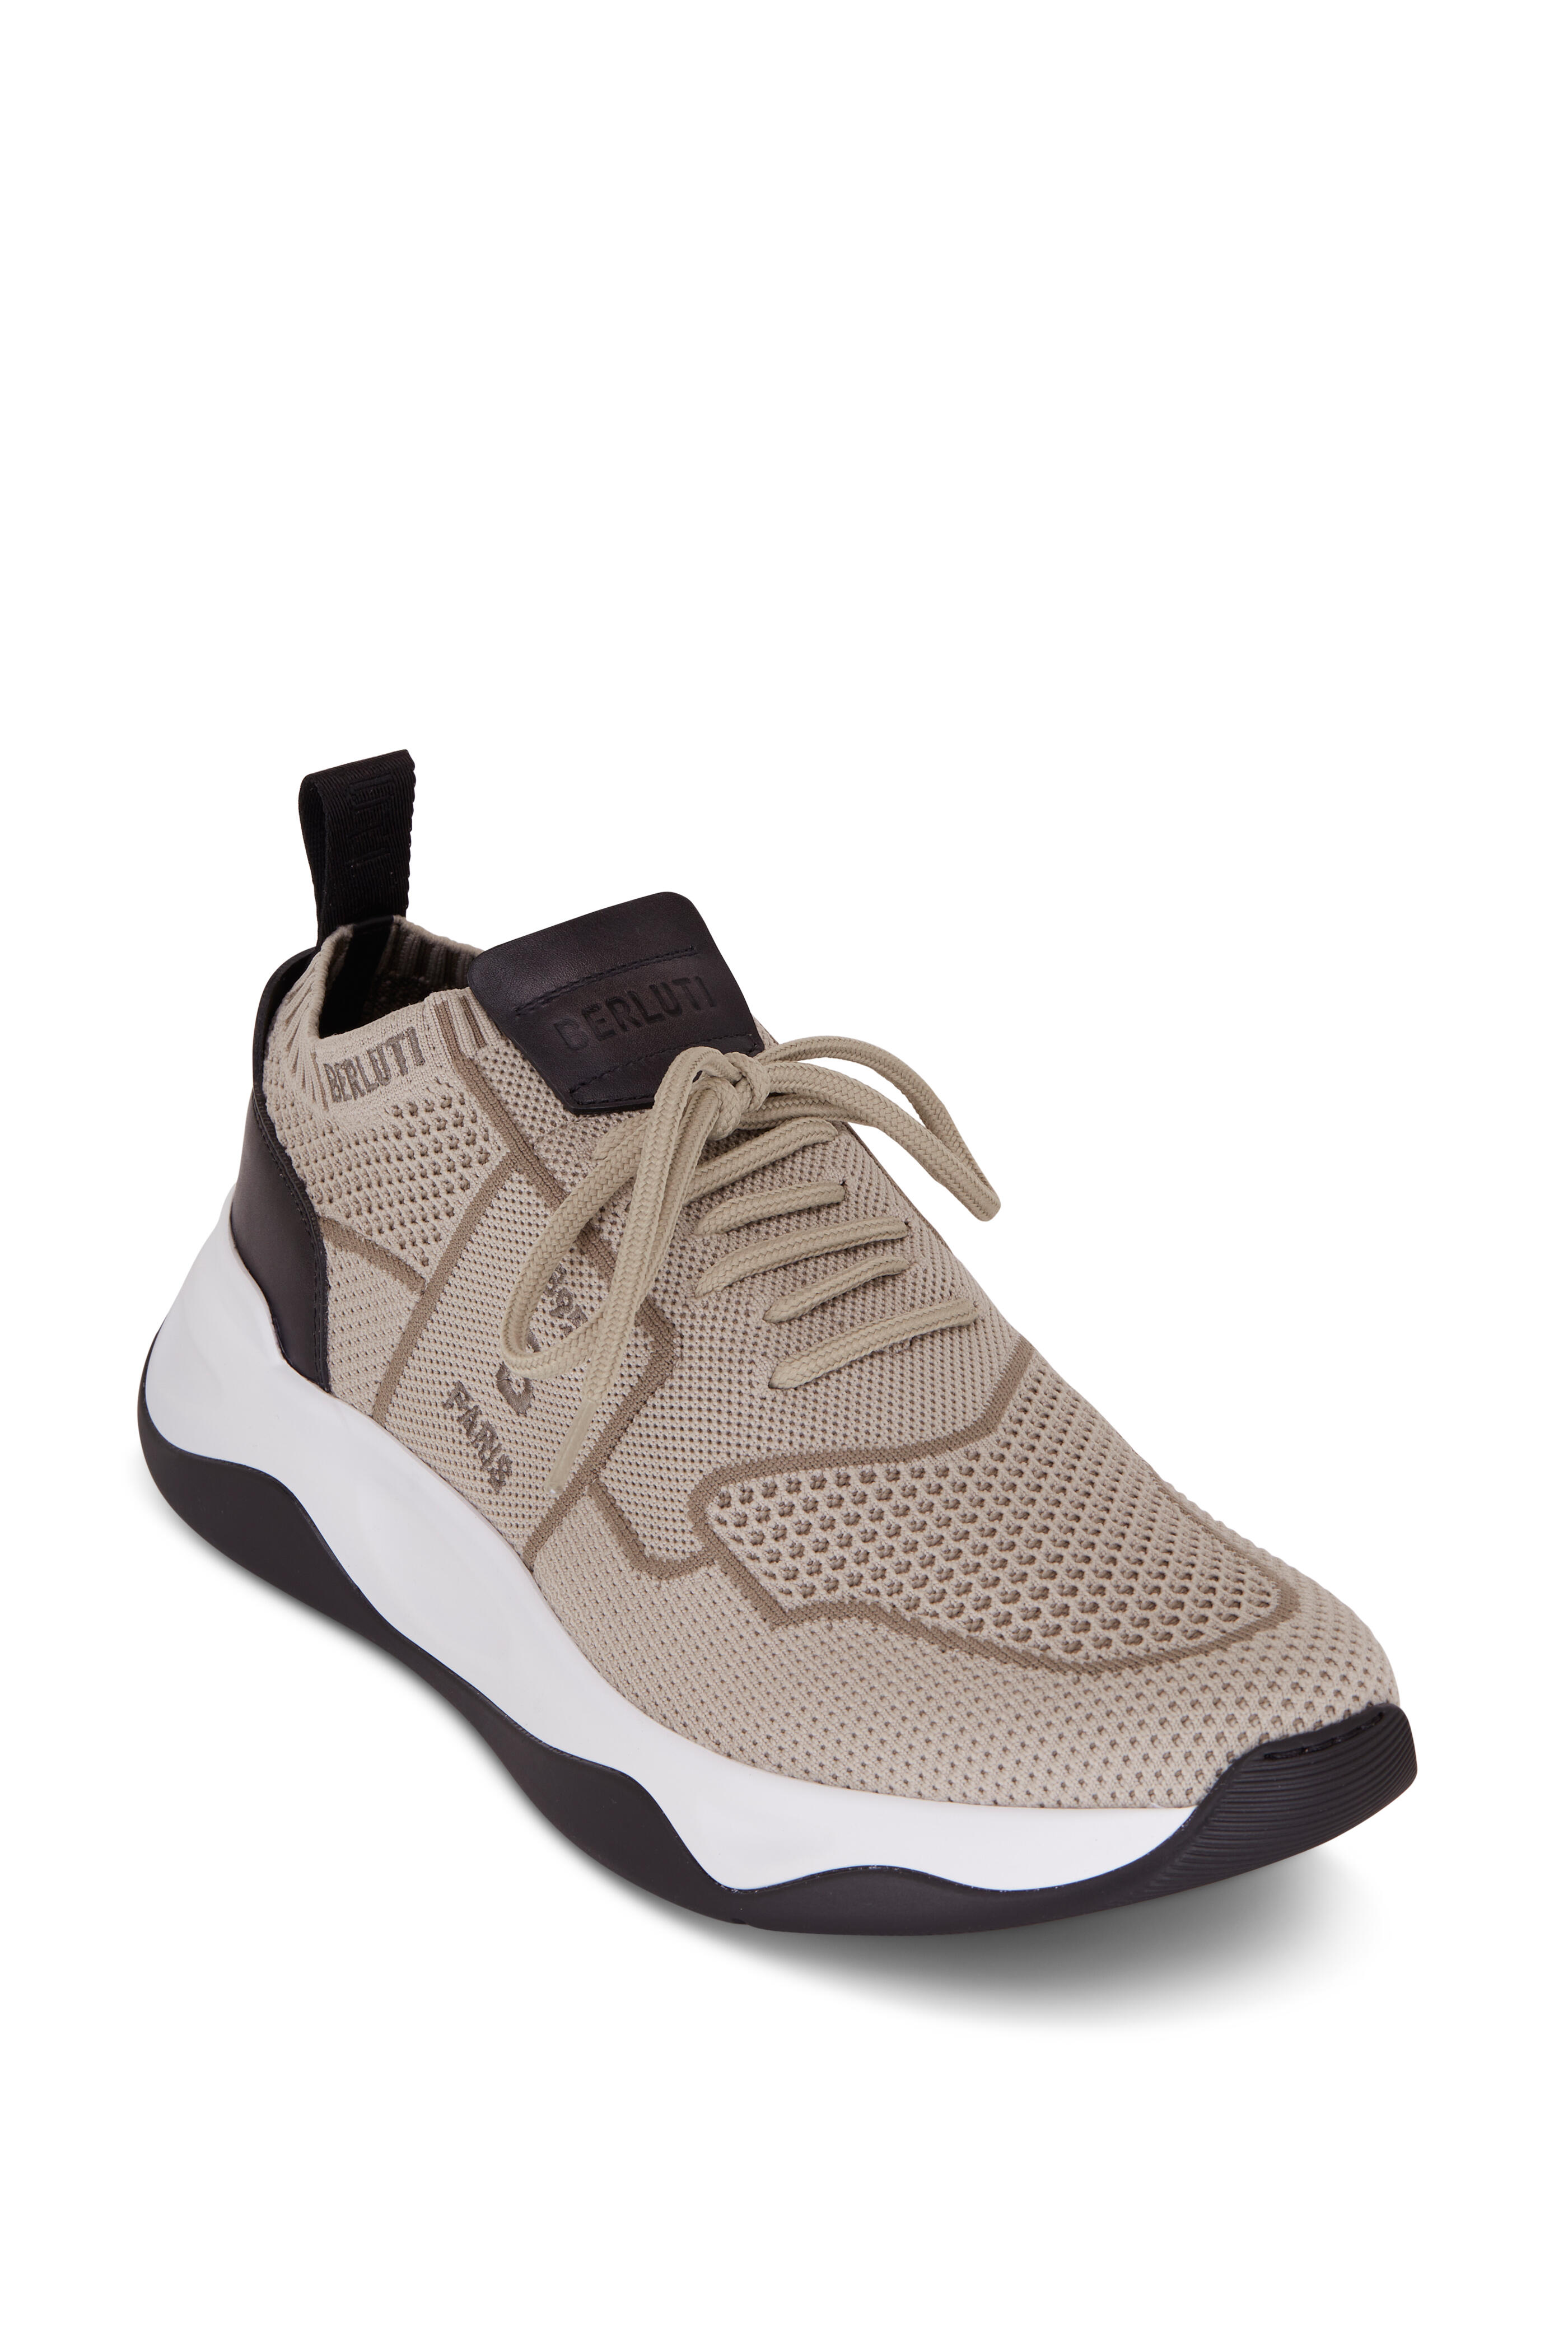 Berluti Men's Shadow Sand Knit Sneaker | 9 M by Mitchell Stores